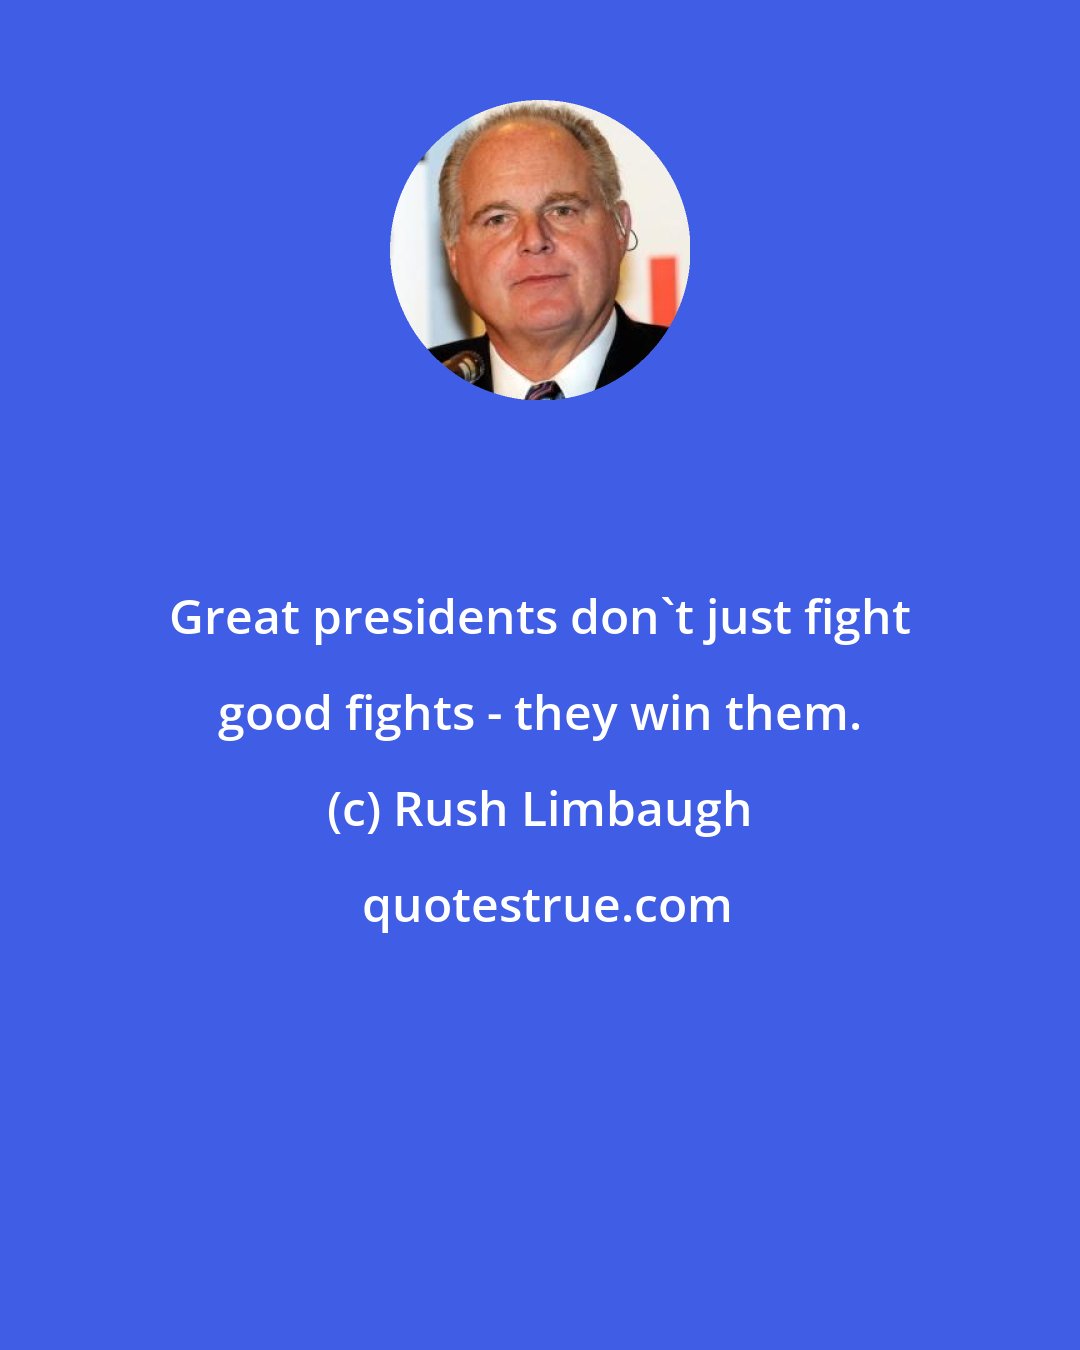 Rush Limbaugh: Great presidents don't just fight good fights - they win them.